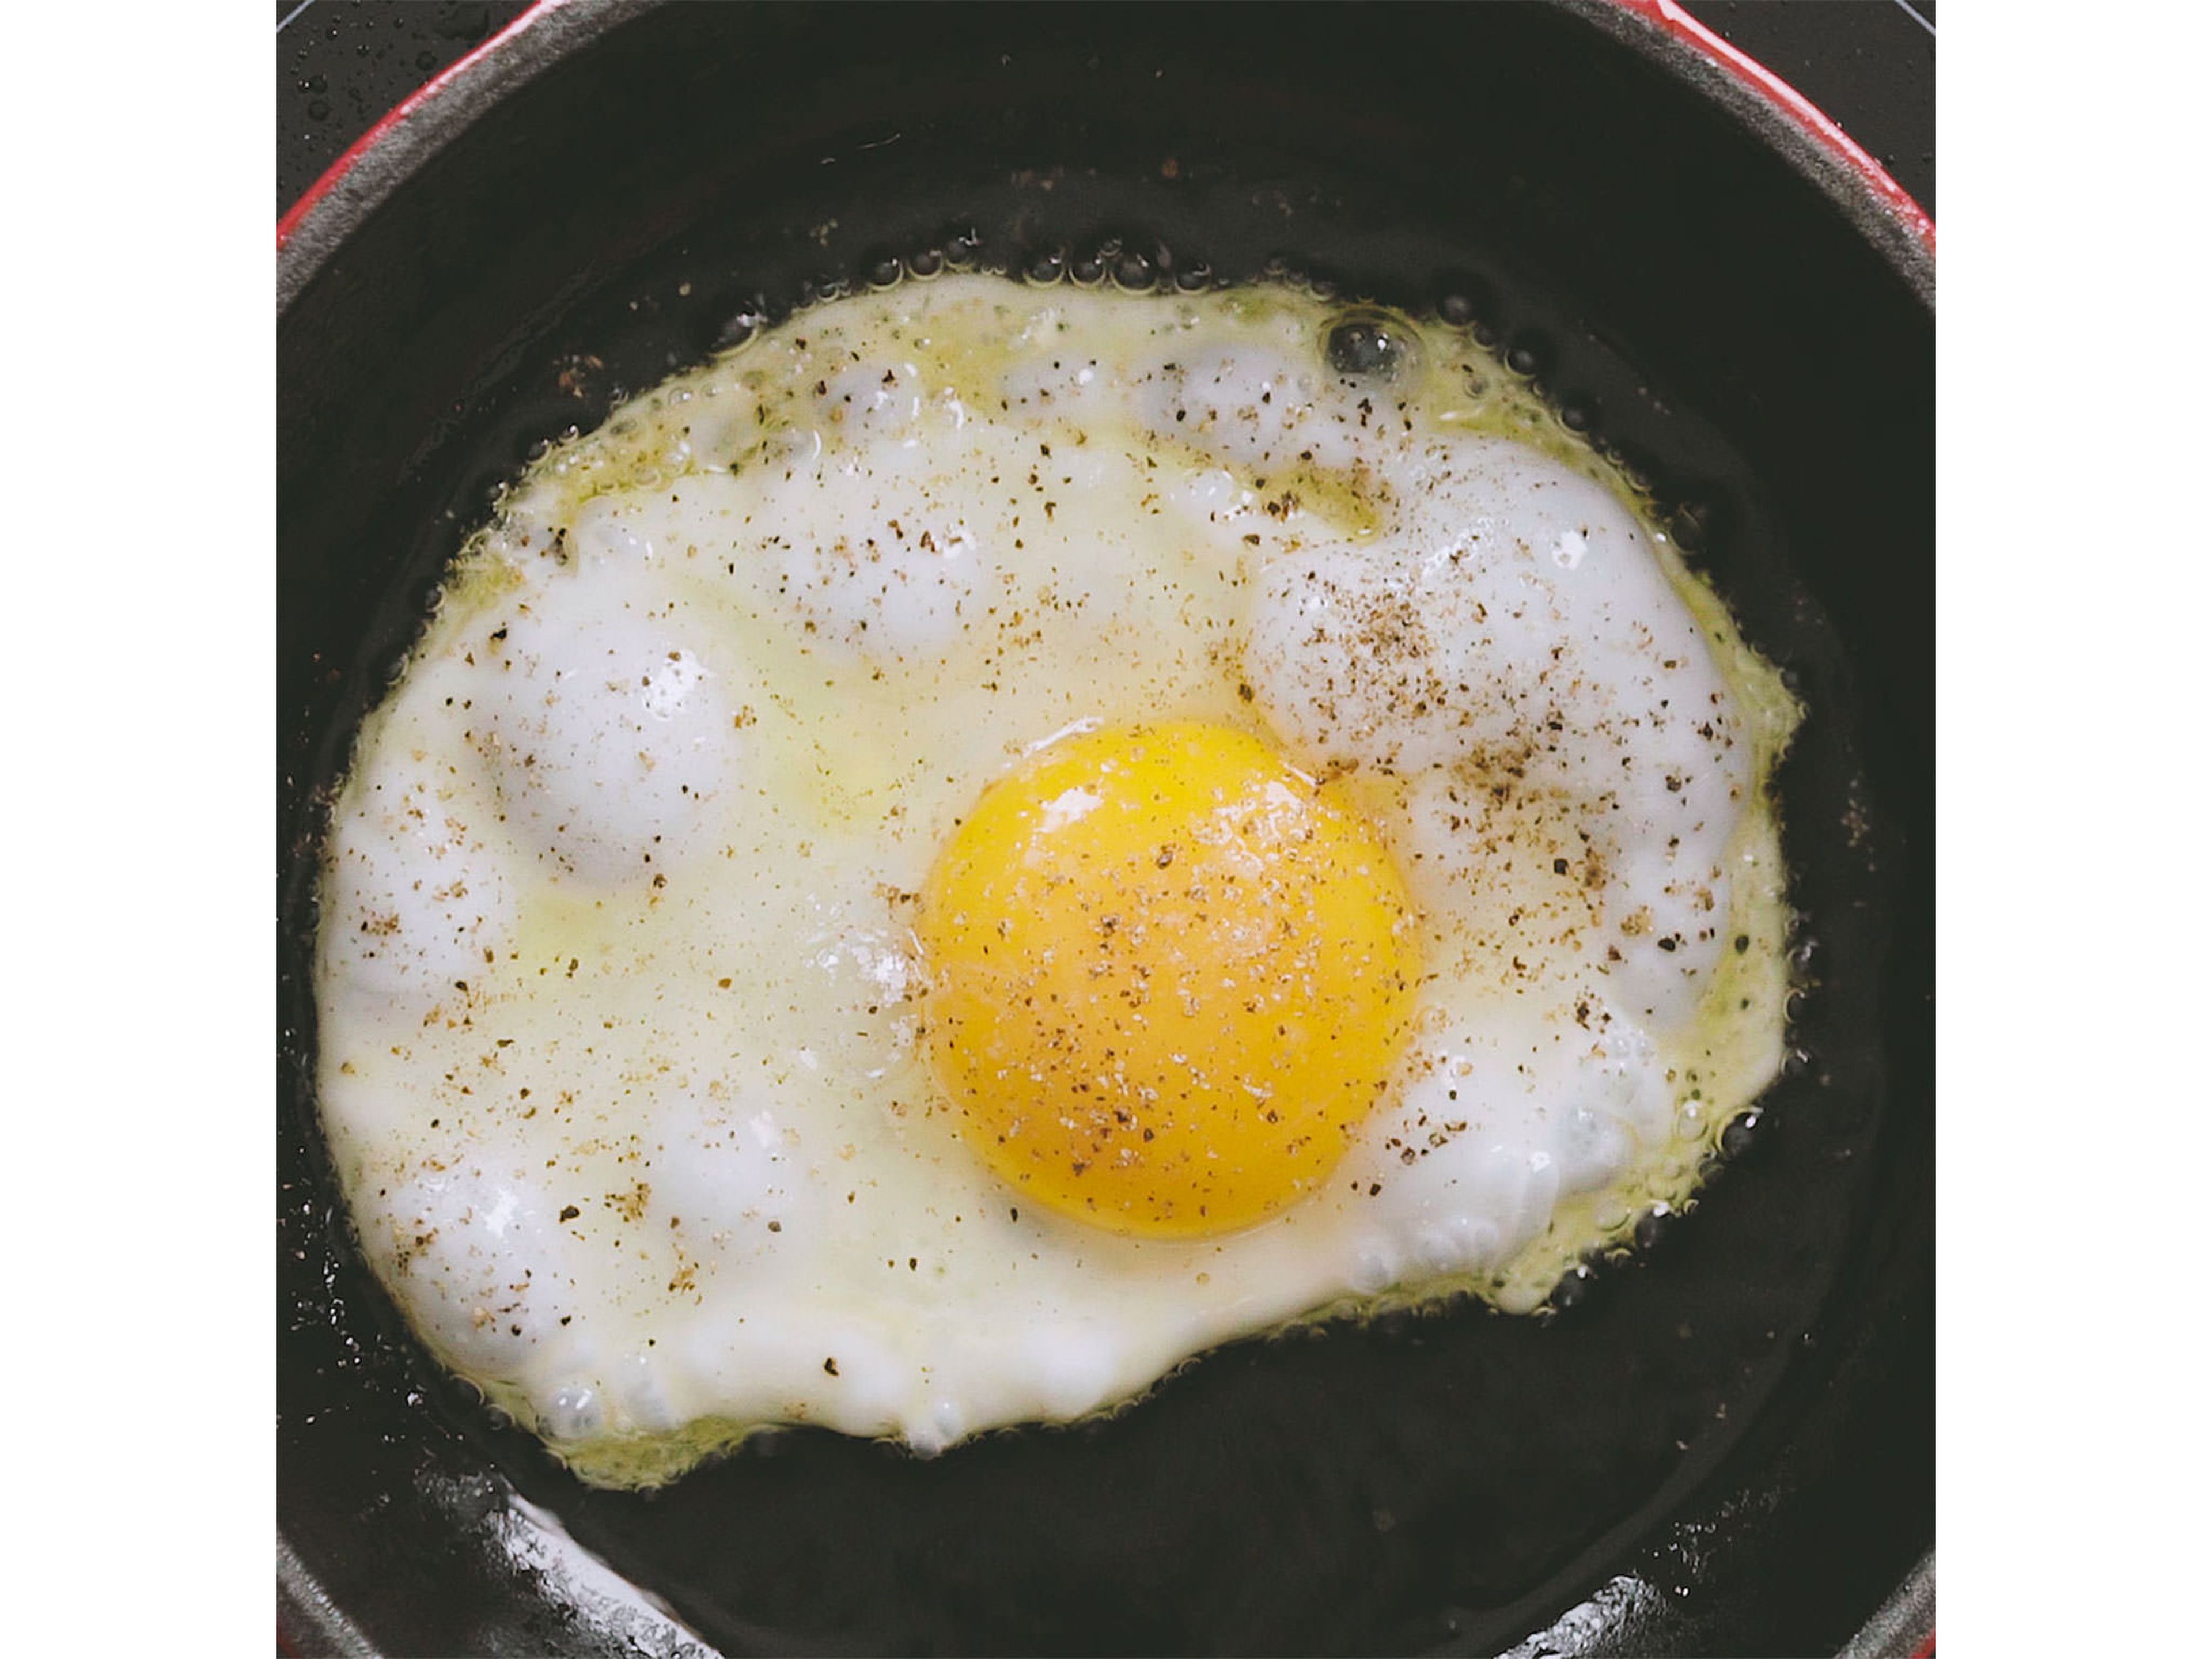 In a frying pan, heat olive oil over medium-high heat and fry egg. Season with salt and pepper.